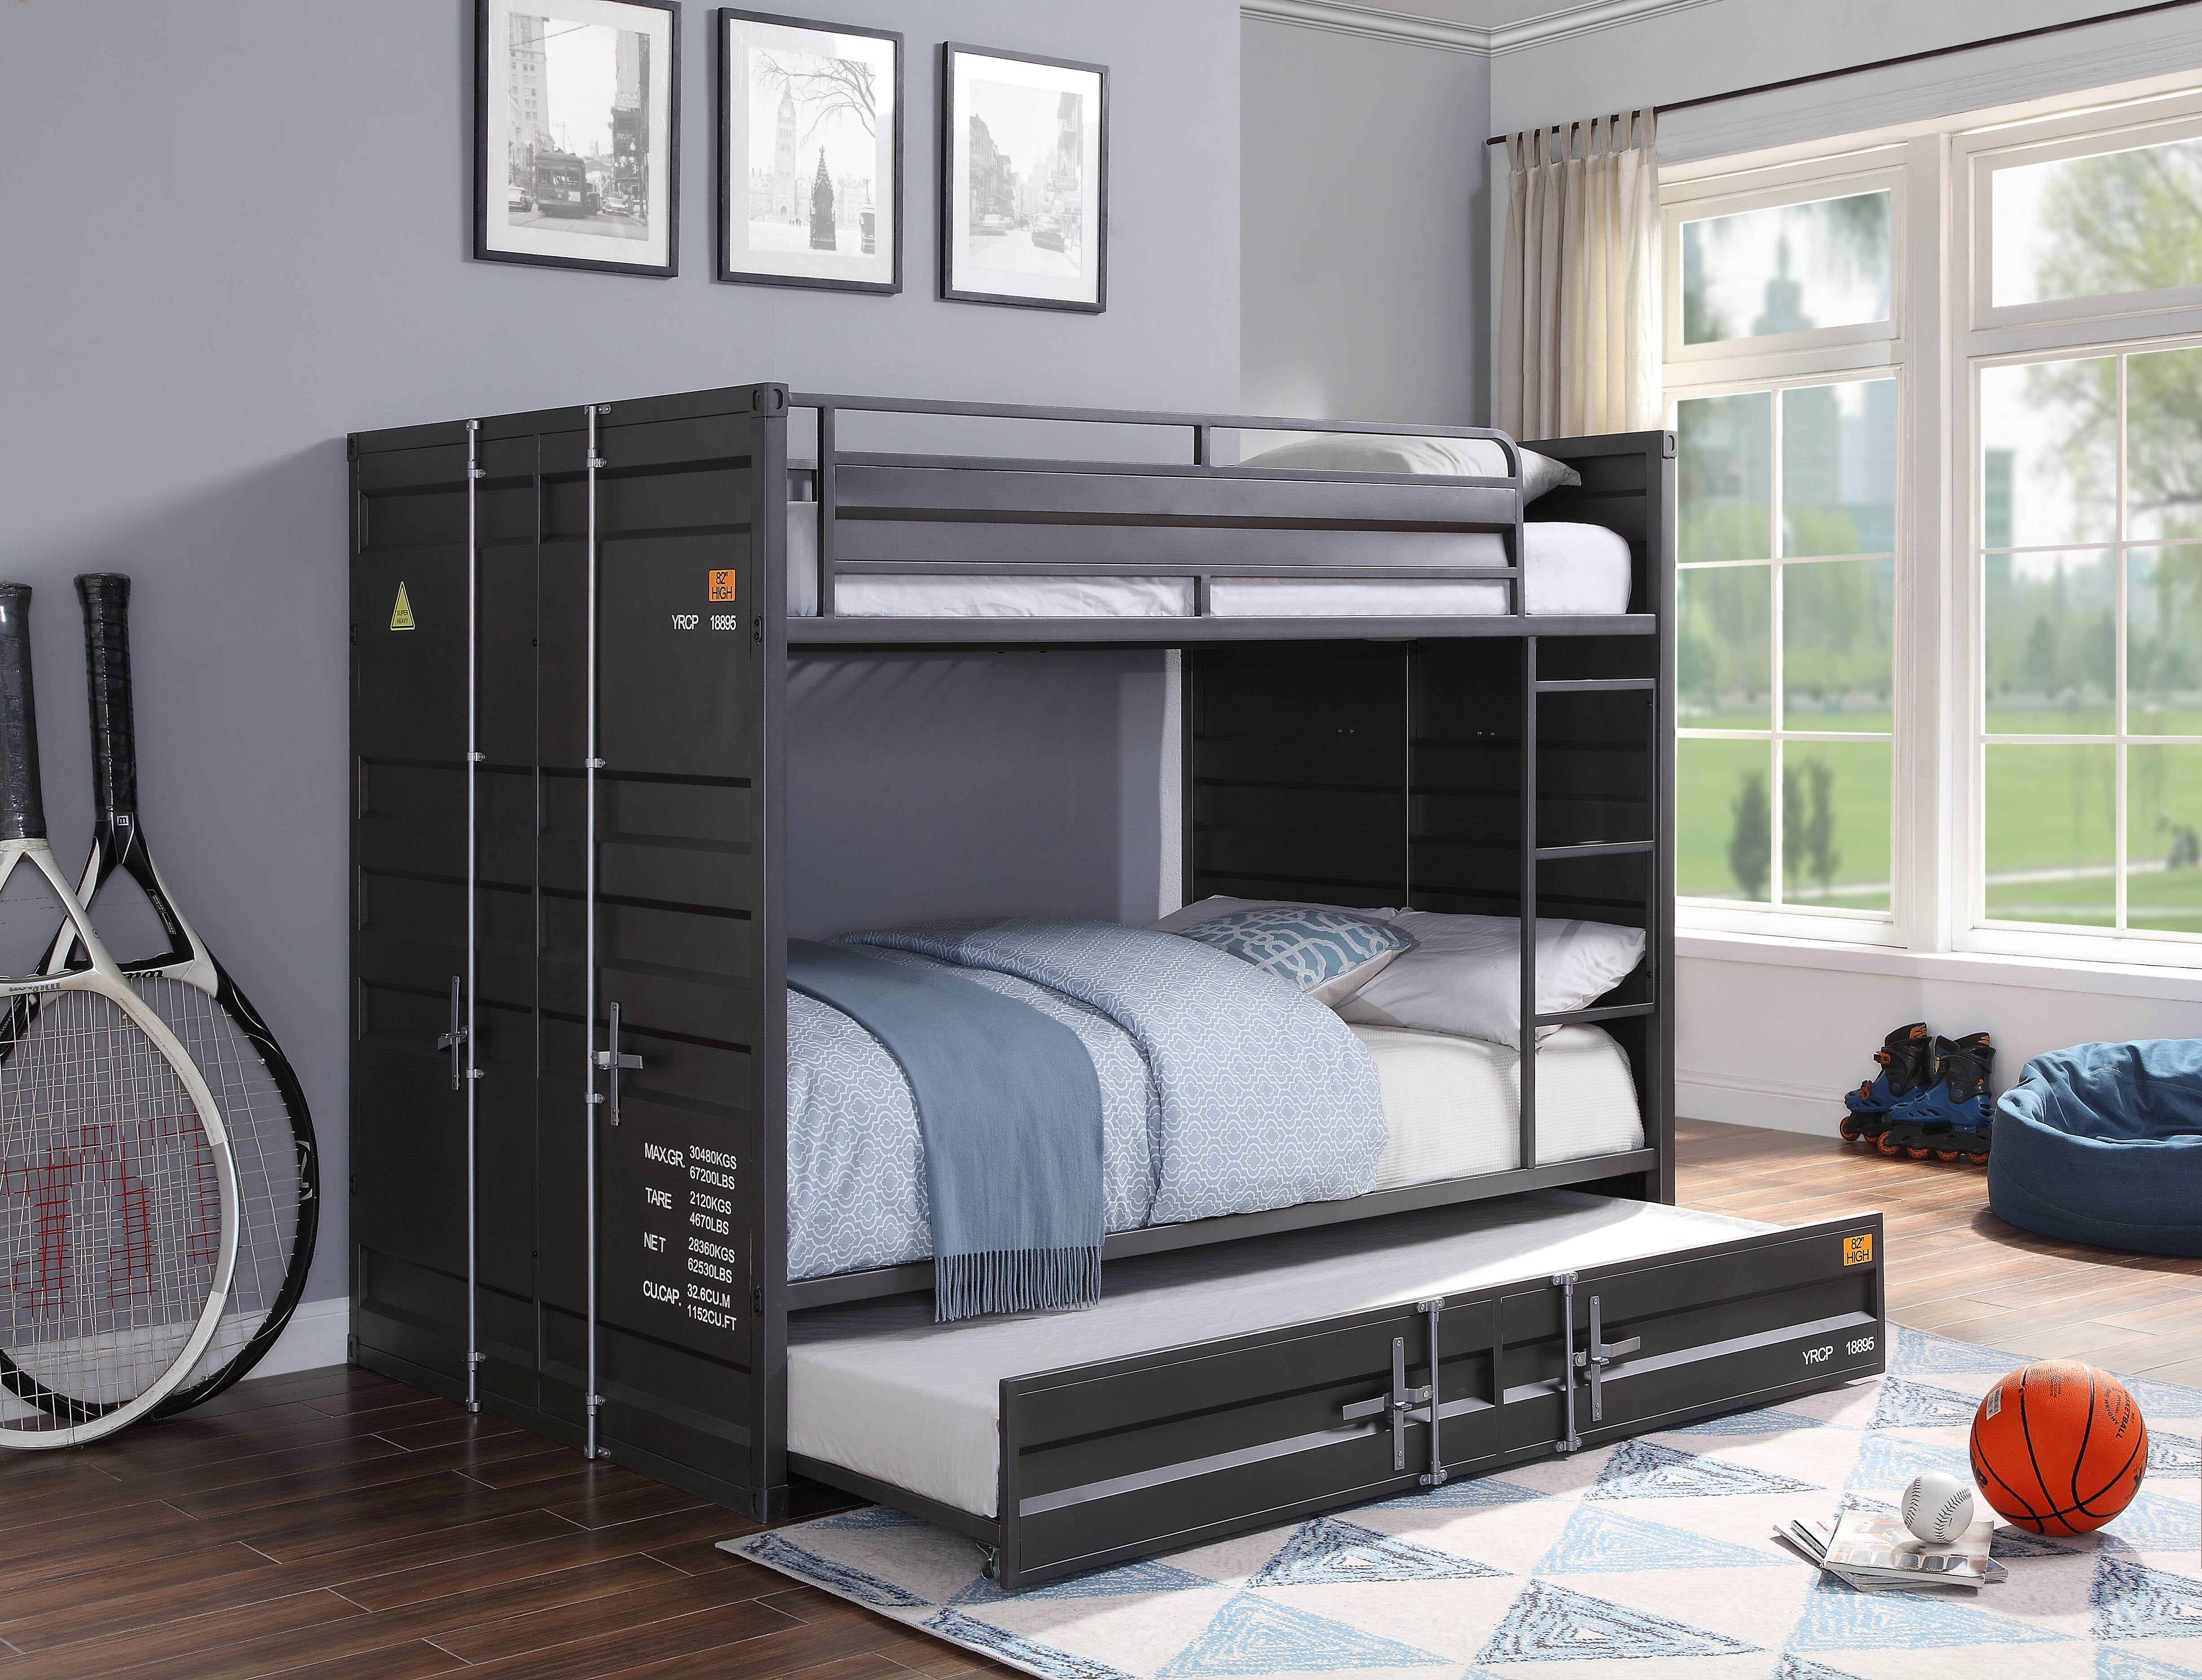 Picture of ACME Furniture 37895 78 x 56 x 65 in. Cargo Bunk Bed, Gunmetal - Full Size